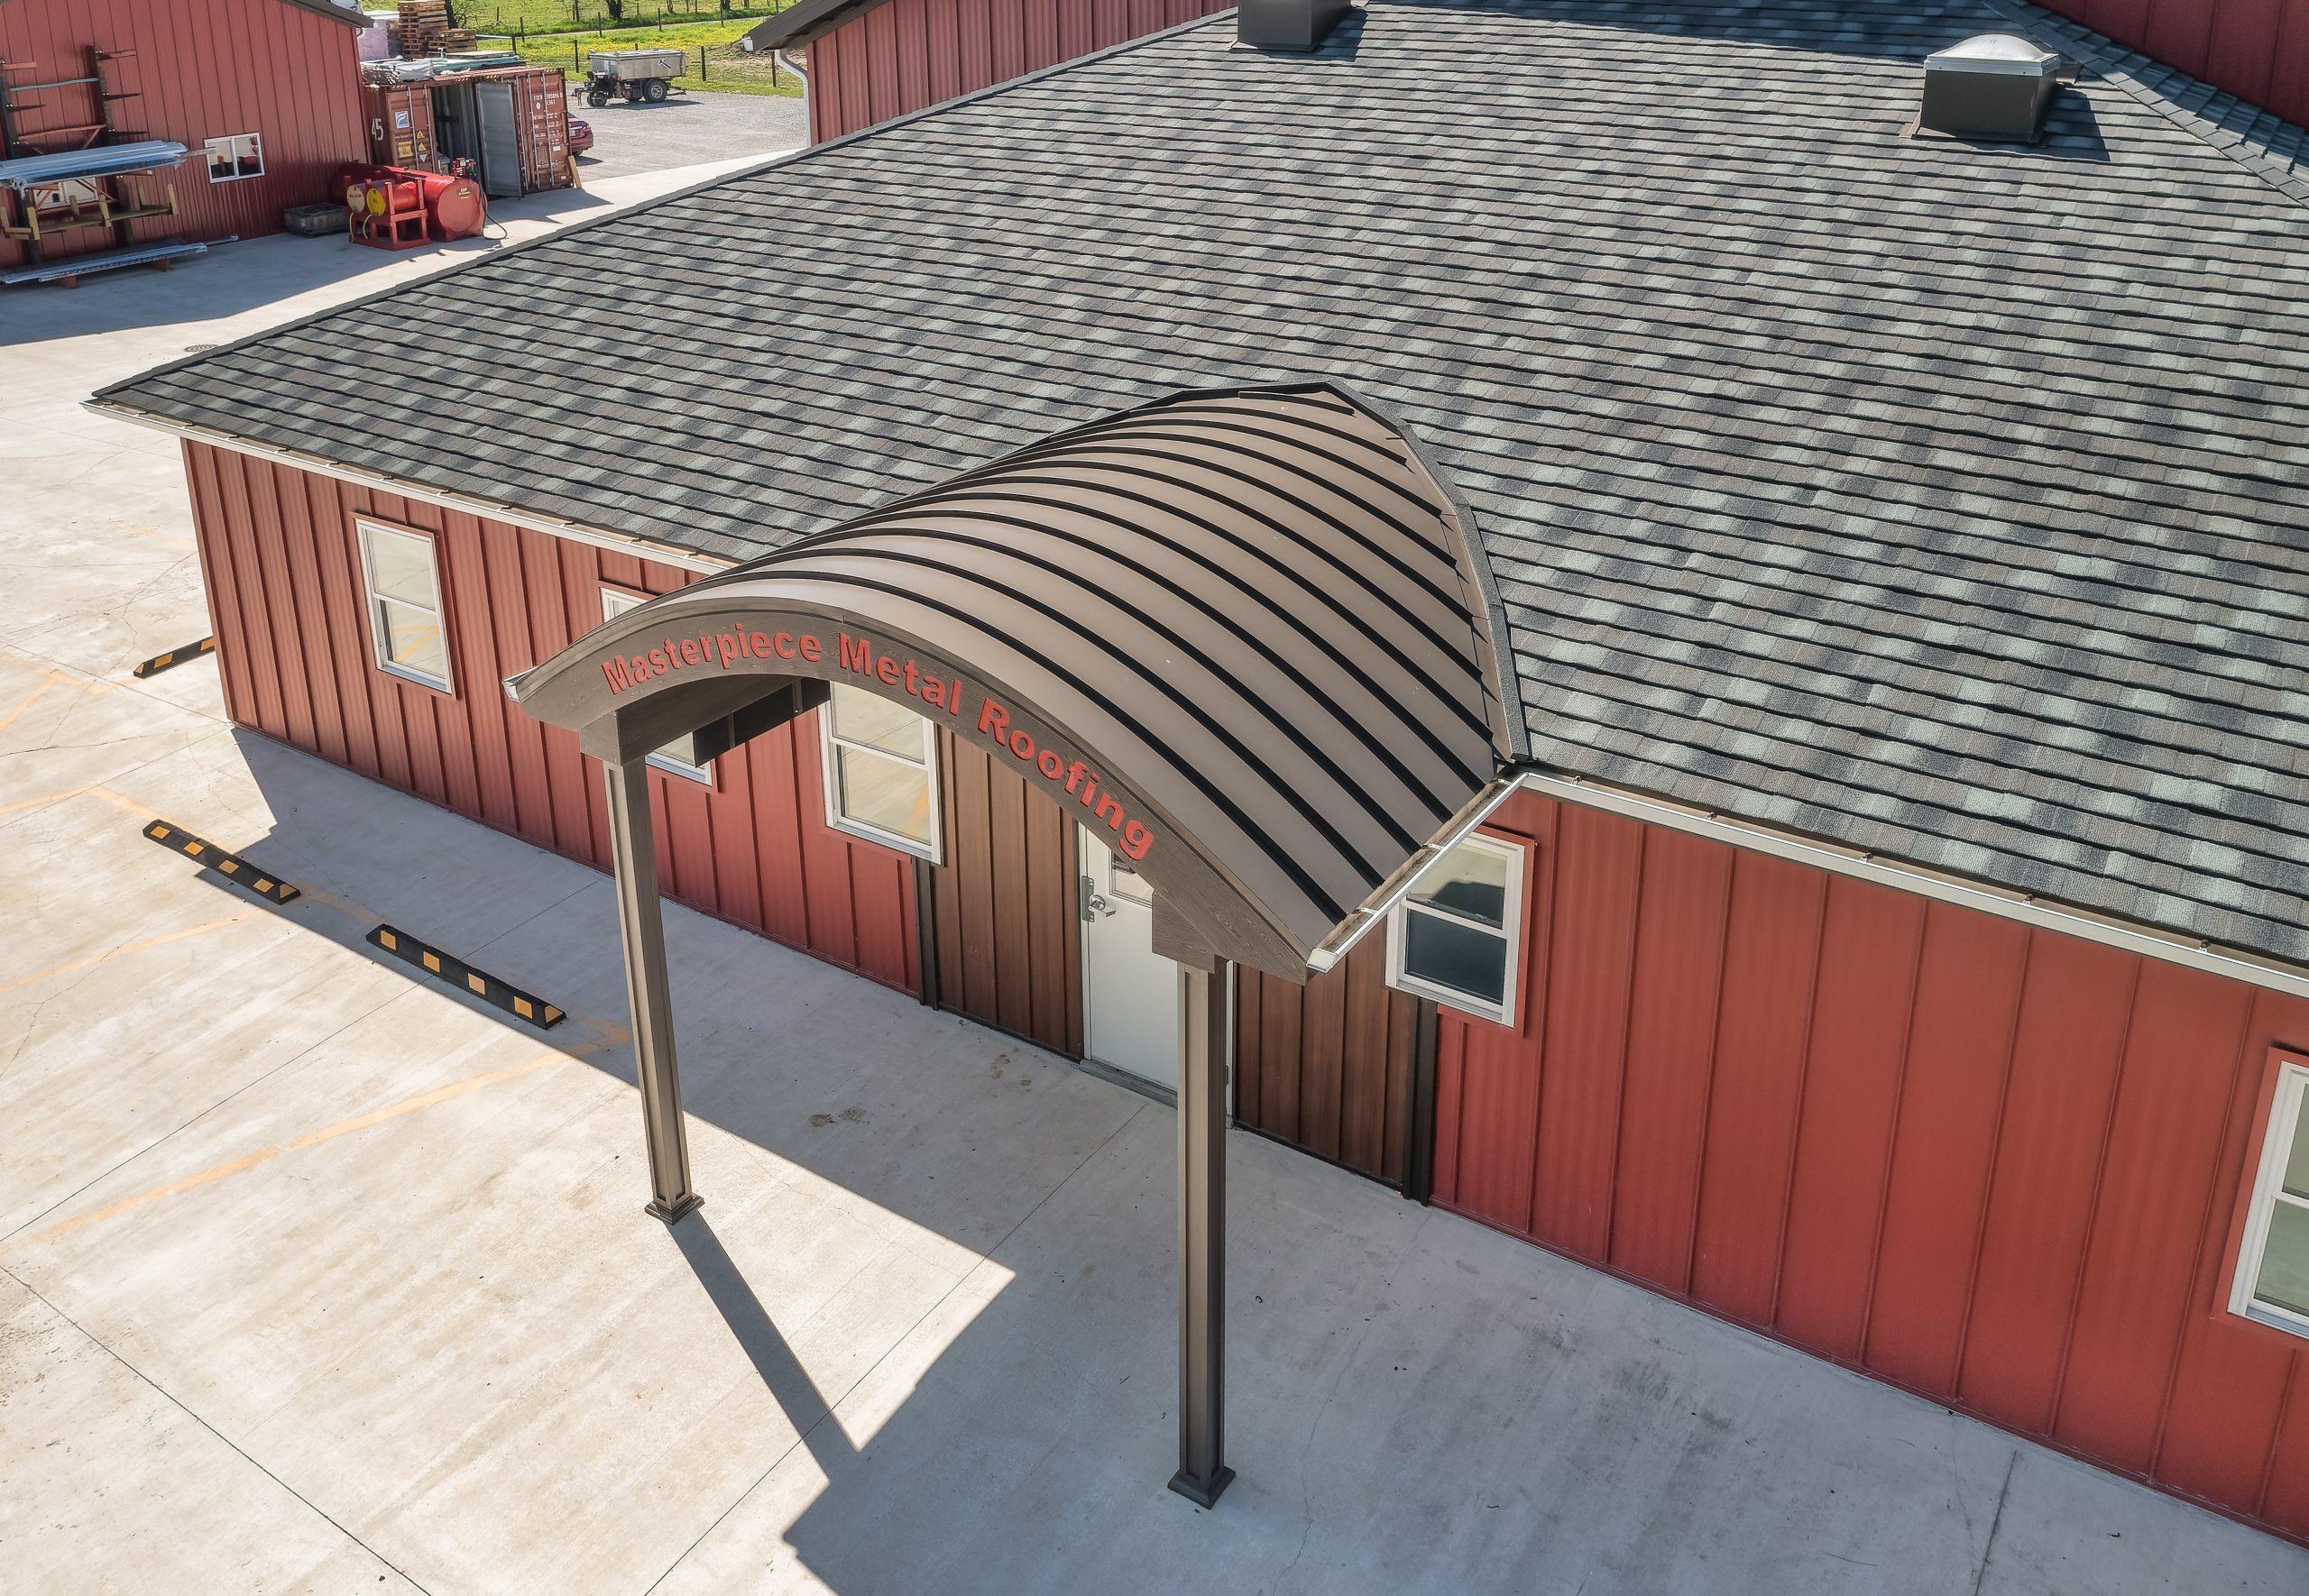 Masterpiece Metal Roofing: Enhancing Durability and Style for Your Home